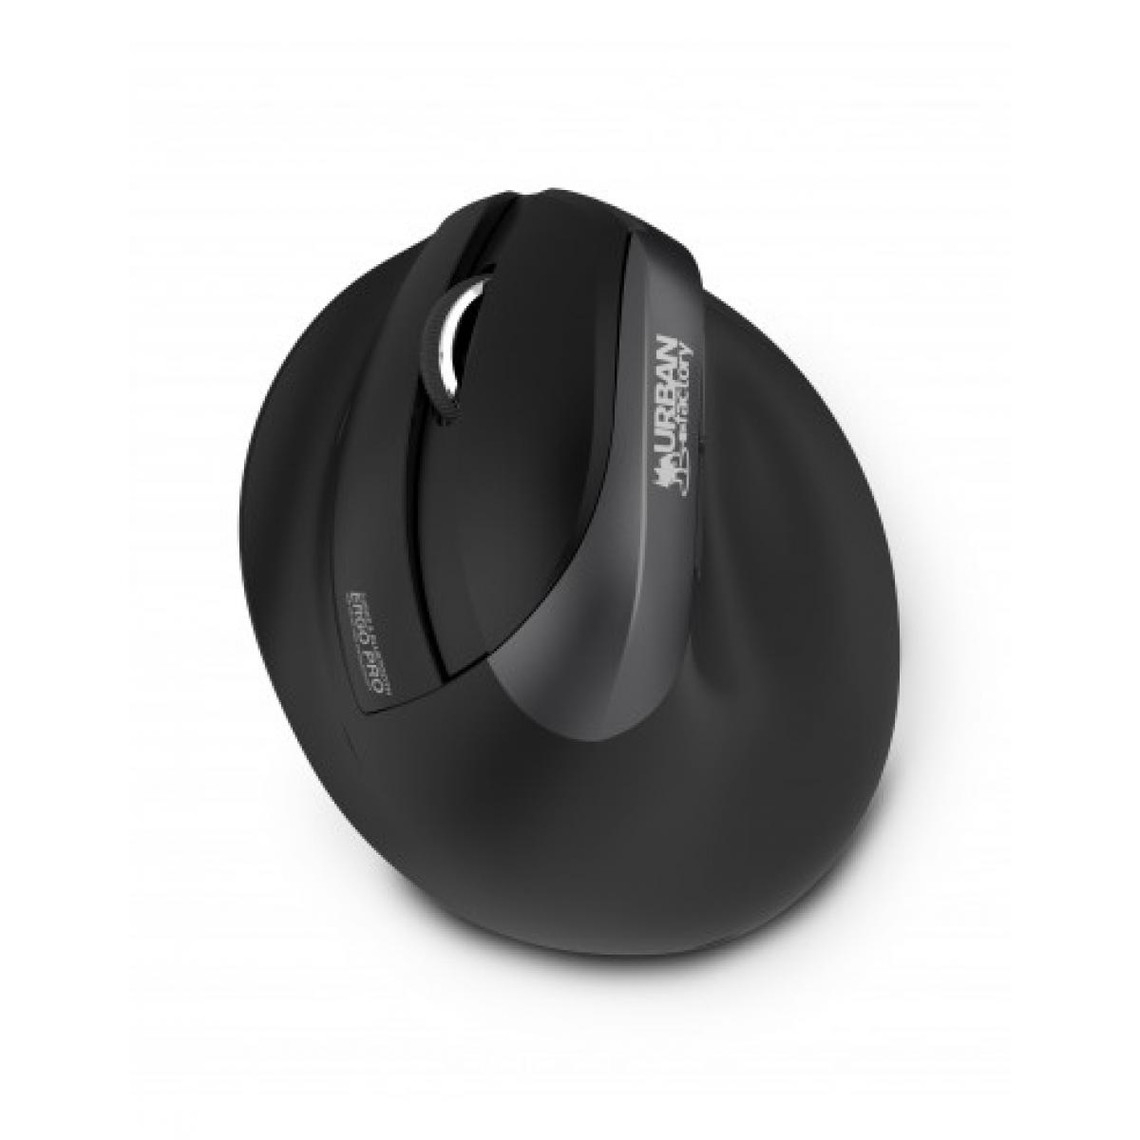 Urban Factory Ergo Mouse Bluetooth Ergo Mouse Bluetooth 2.4Ghz and wired USB 1000mAh rechargeable battery in USB-C using the included